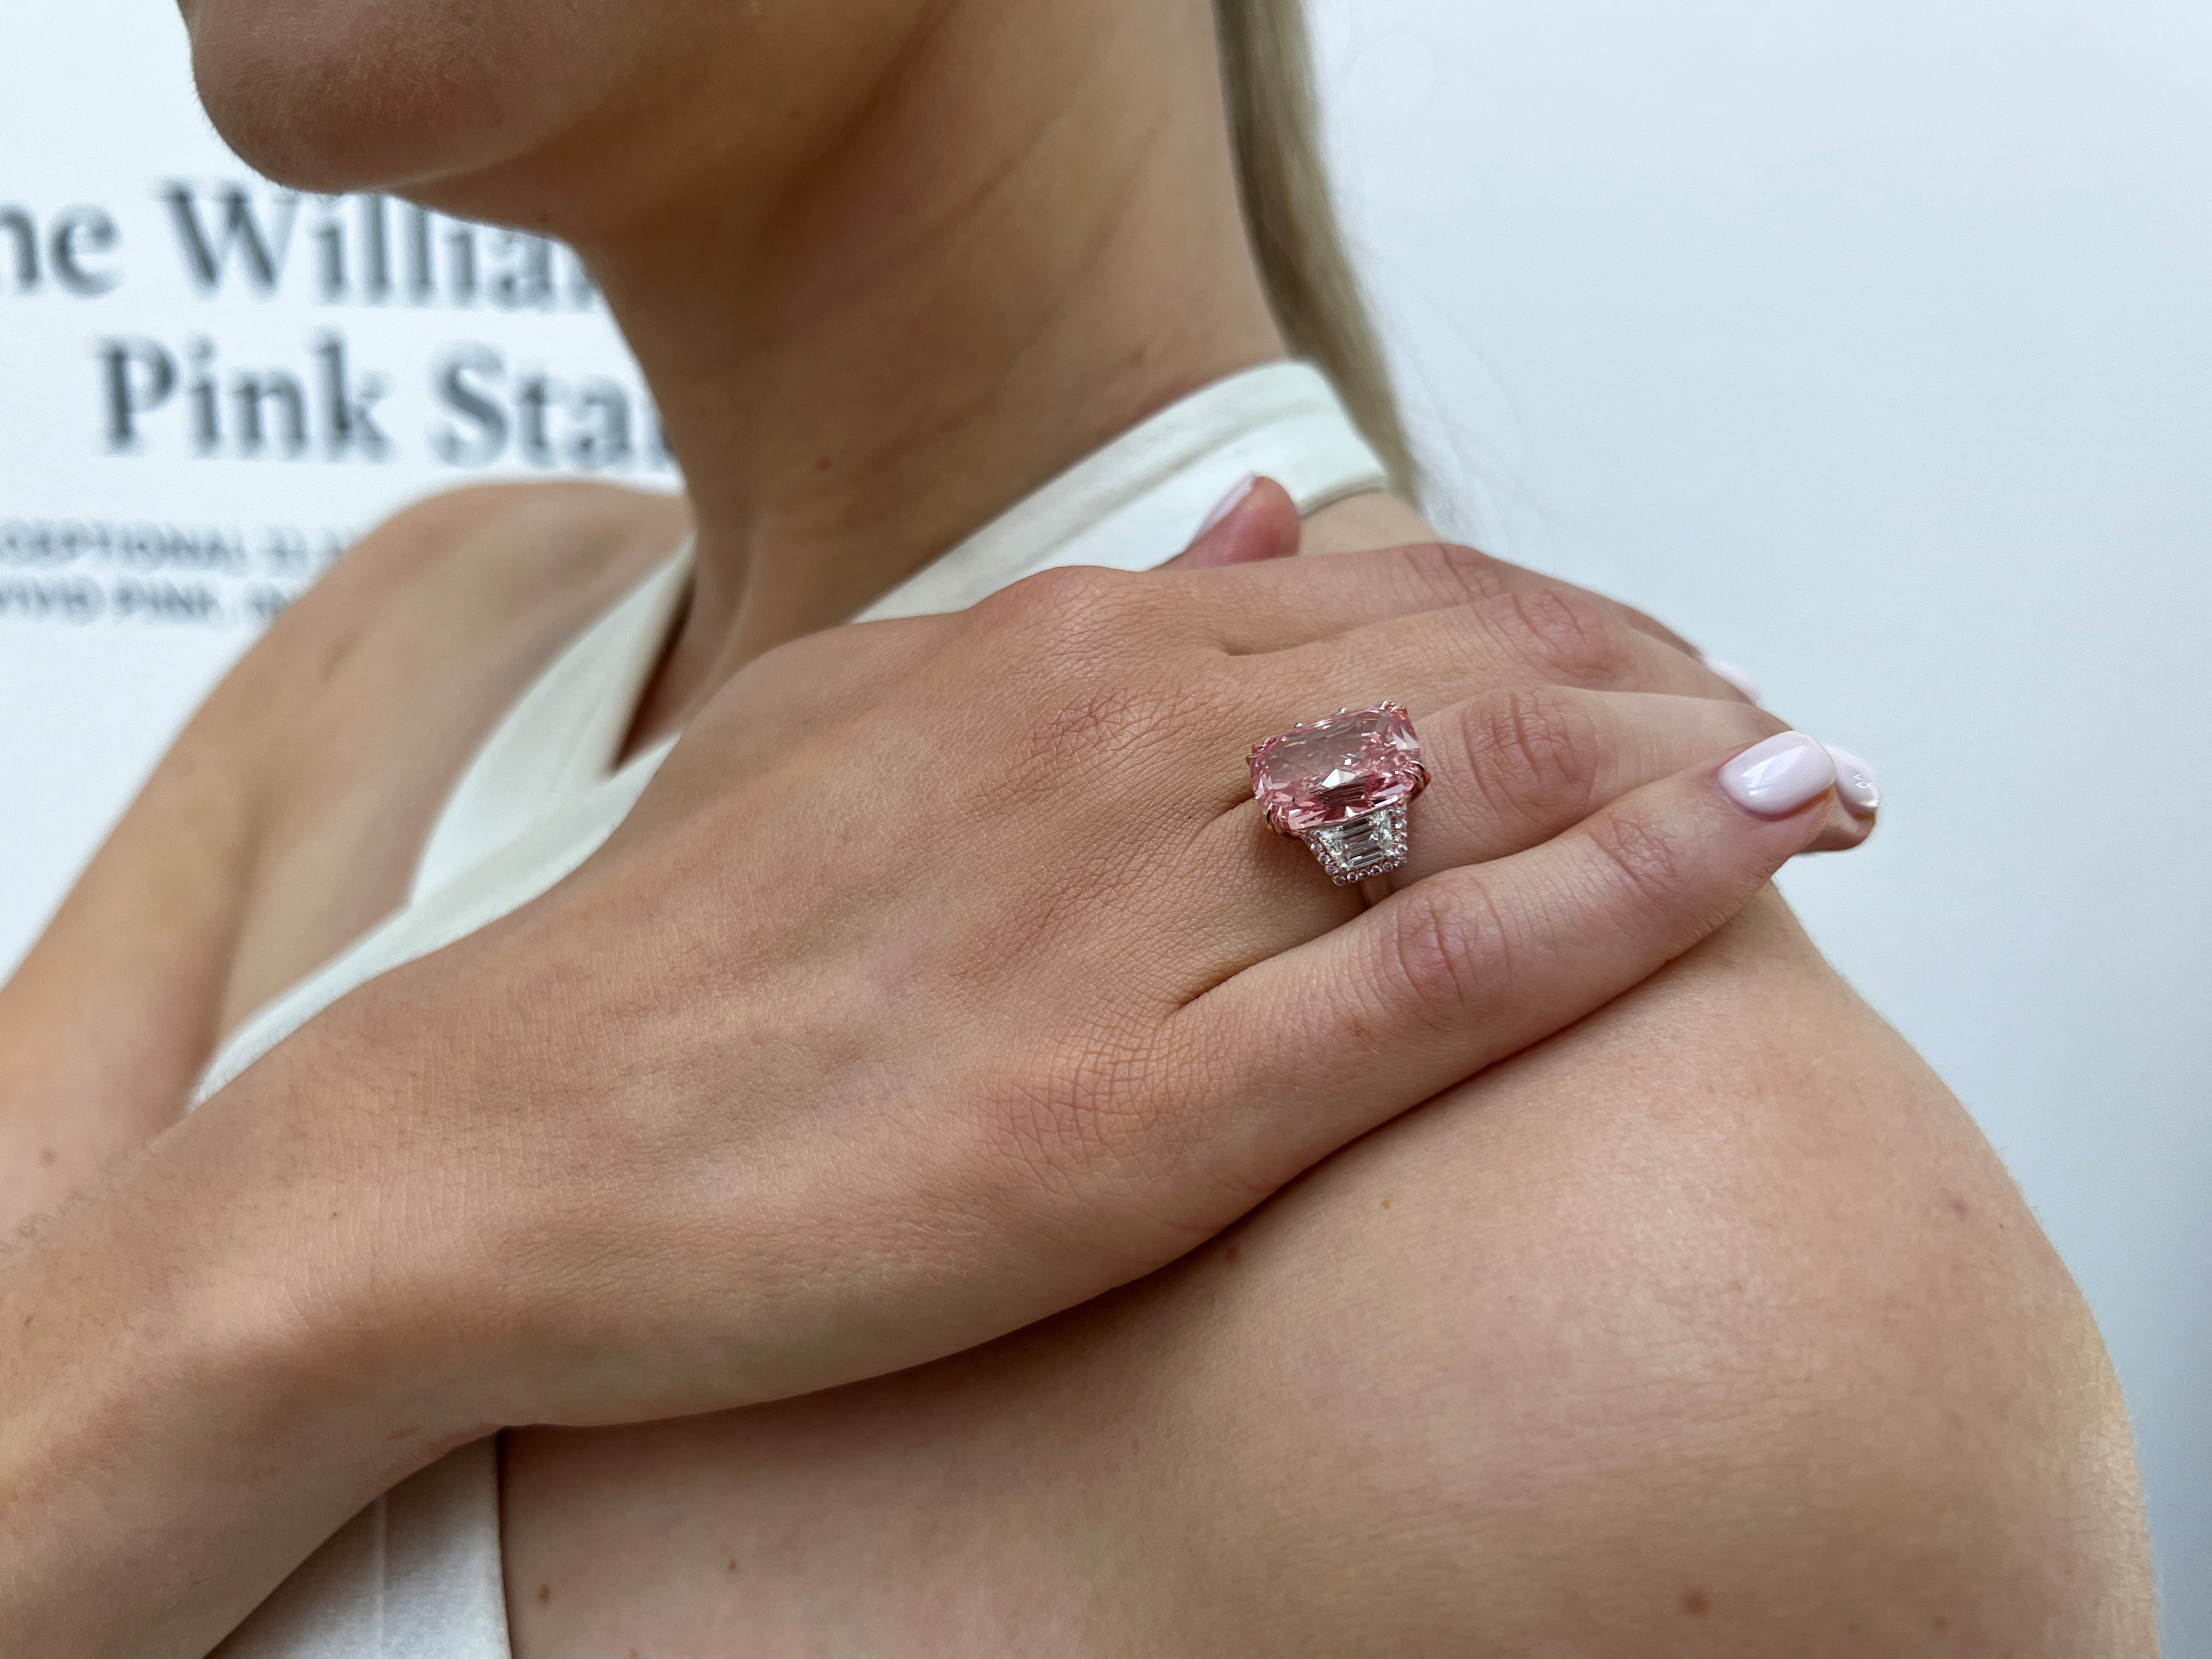 Model poses with a pink diamond due to put up for auction at Sotheby’s auction house in London